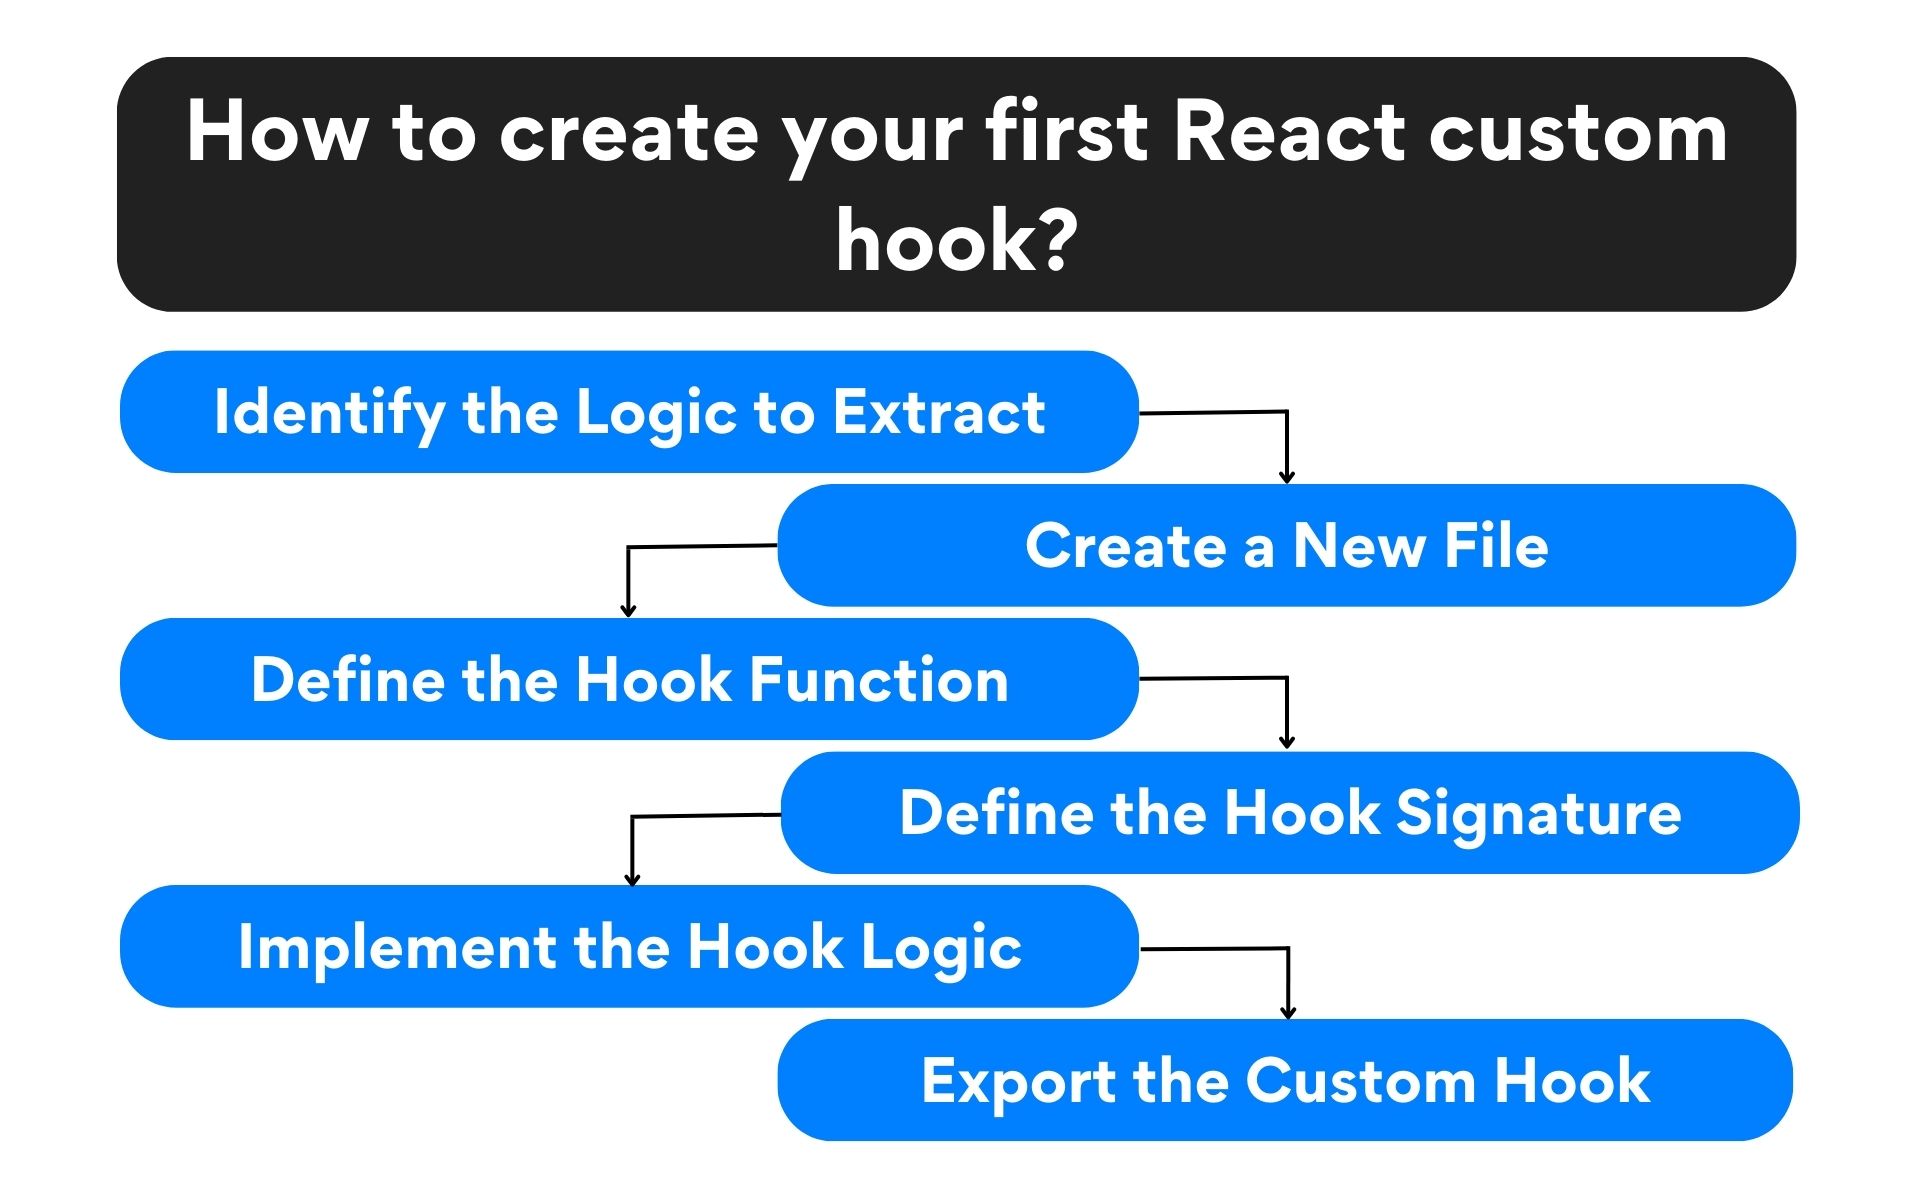 How to create your first React custom hook